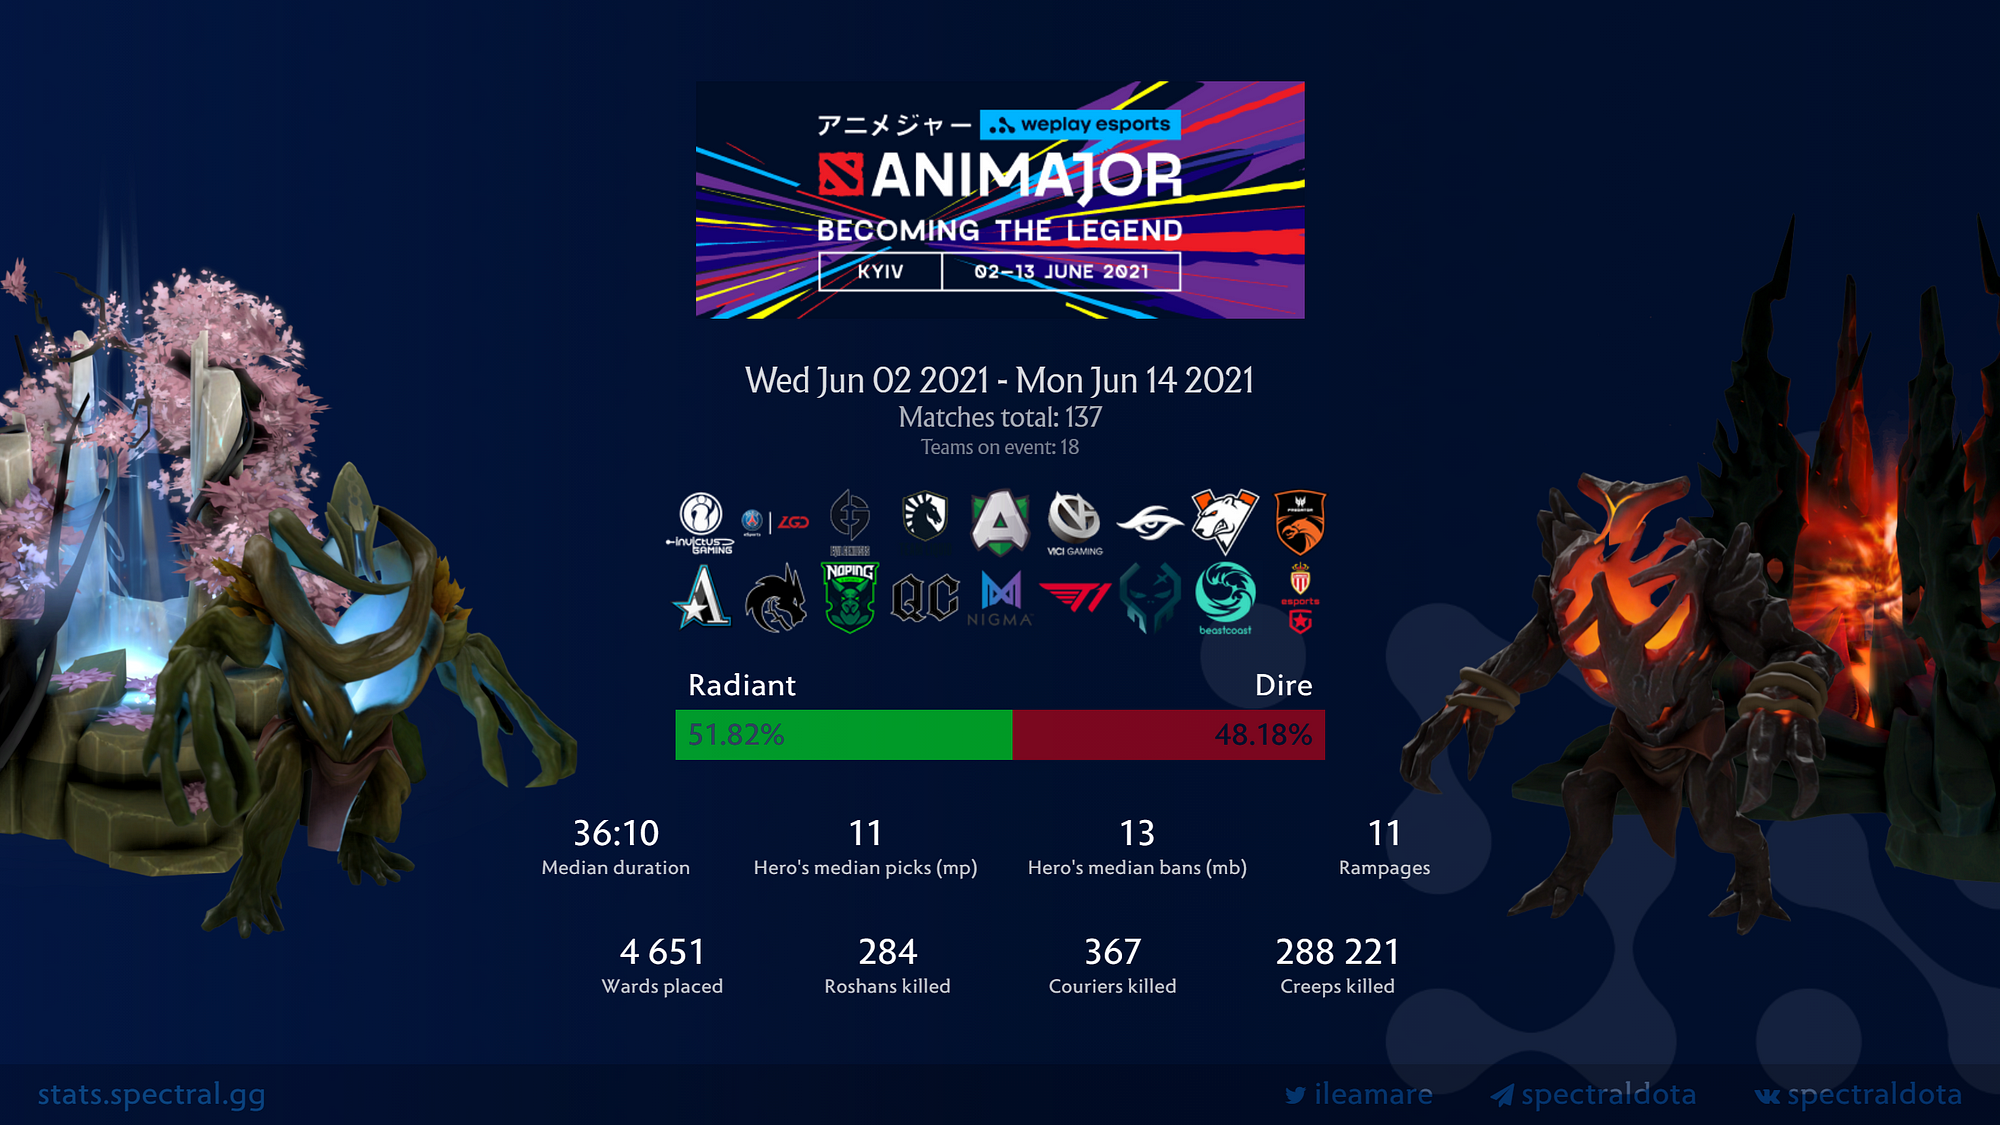 WePlay AniMajor 2021: Tournament Results and Viewership Stats